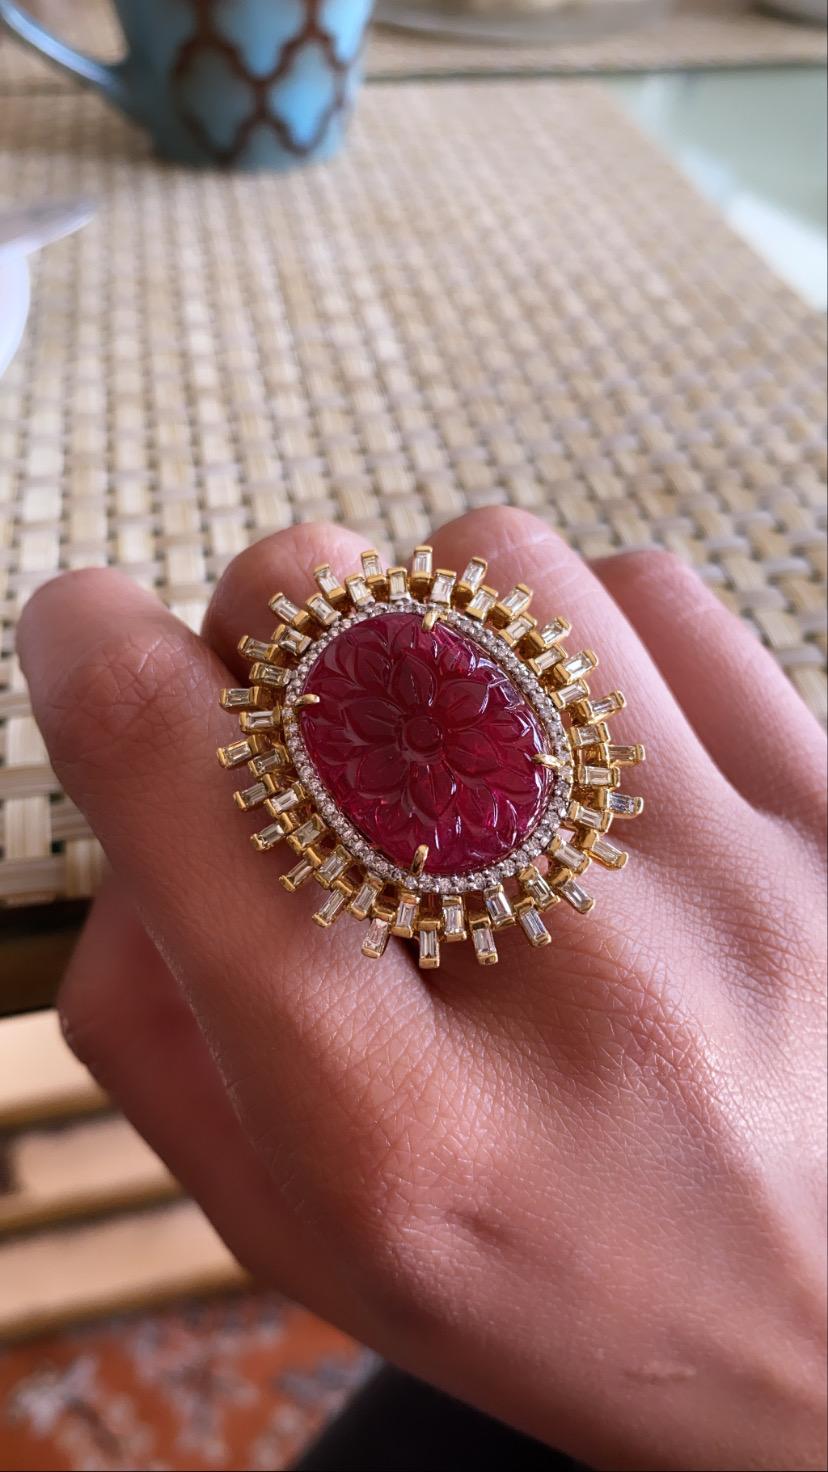 A beautiful cocktail ring set in 18k yellow gold with baguette shape natural diamonds. The carved spinel originates from Burma and weight is 21.41 carats, diamond weight is 2.03 carats . The net gold weight is 17.46 grams and ring dimensions in cm 3